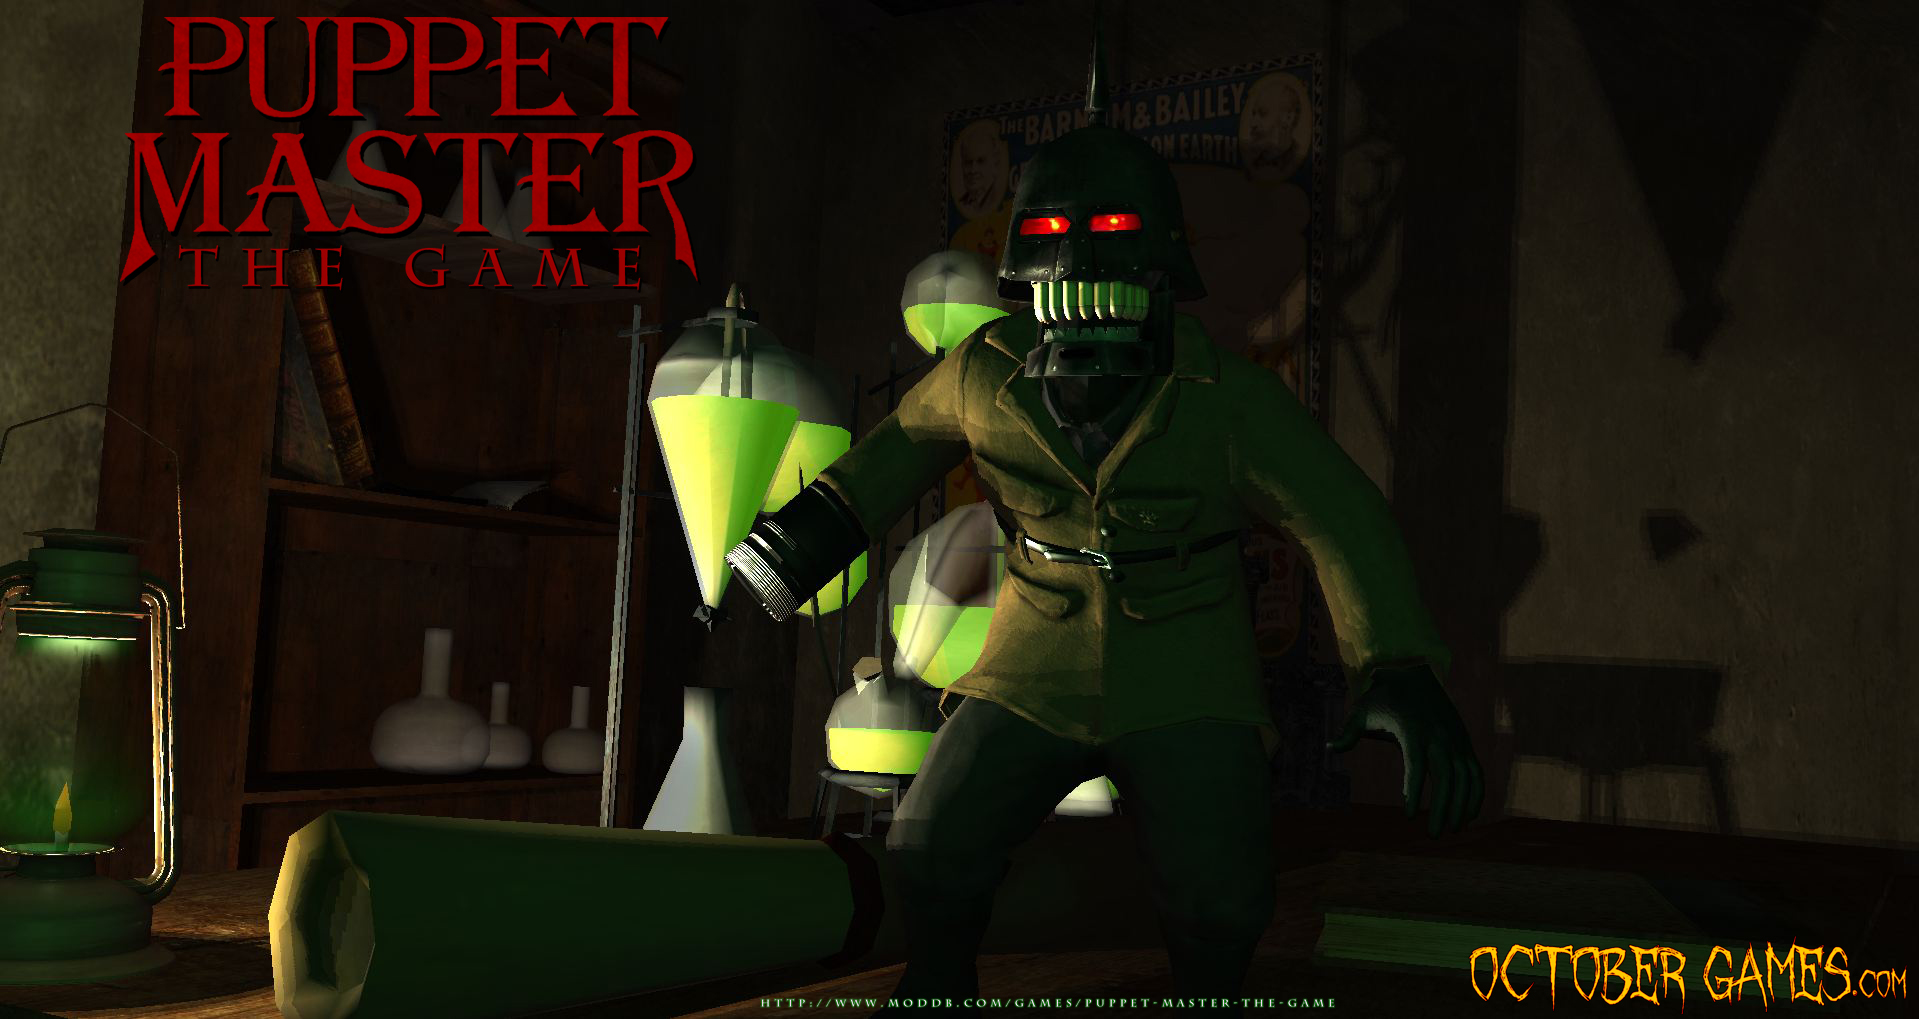 Master of Puppets игра. Puppet Master Torch. Puppet Master the game. Puppet Master из игры. Puppetmaster adventures